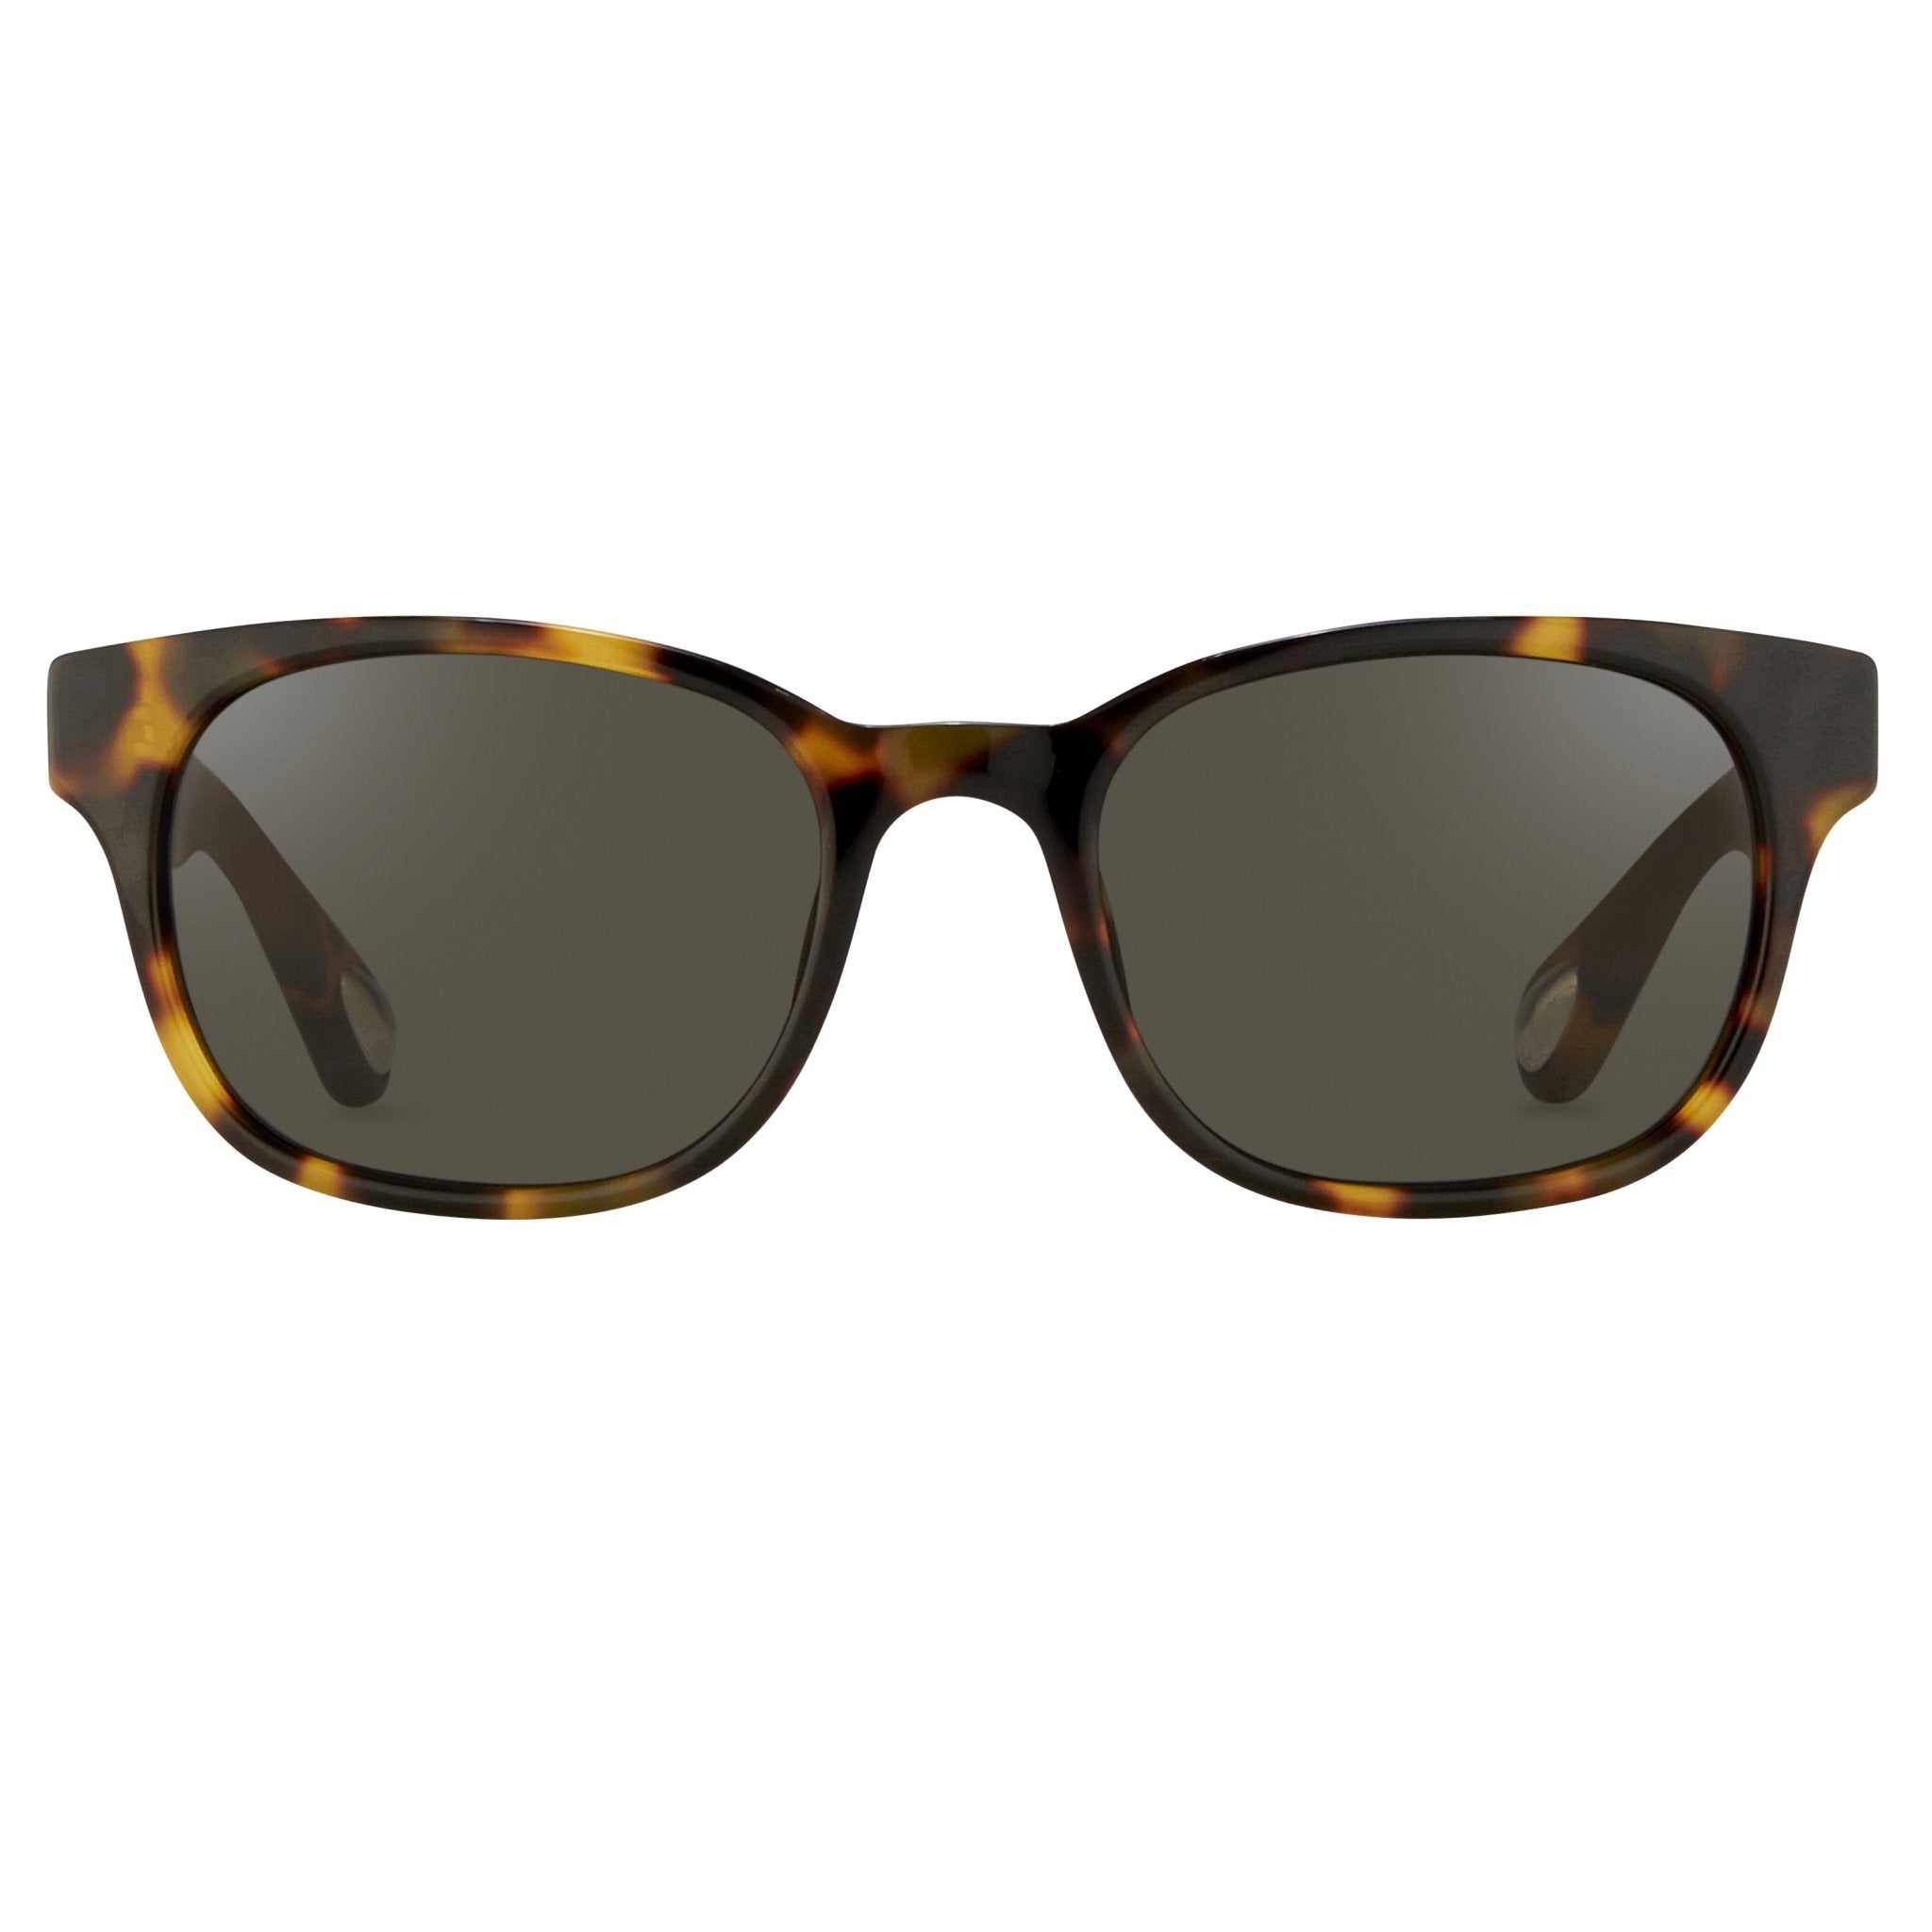 Ann Demeulemeester Sunglasses Rectangular Tortoise Shell 925 Silver with Grey Lenses AD15C7SUN - Watches & Crystals